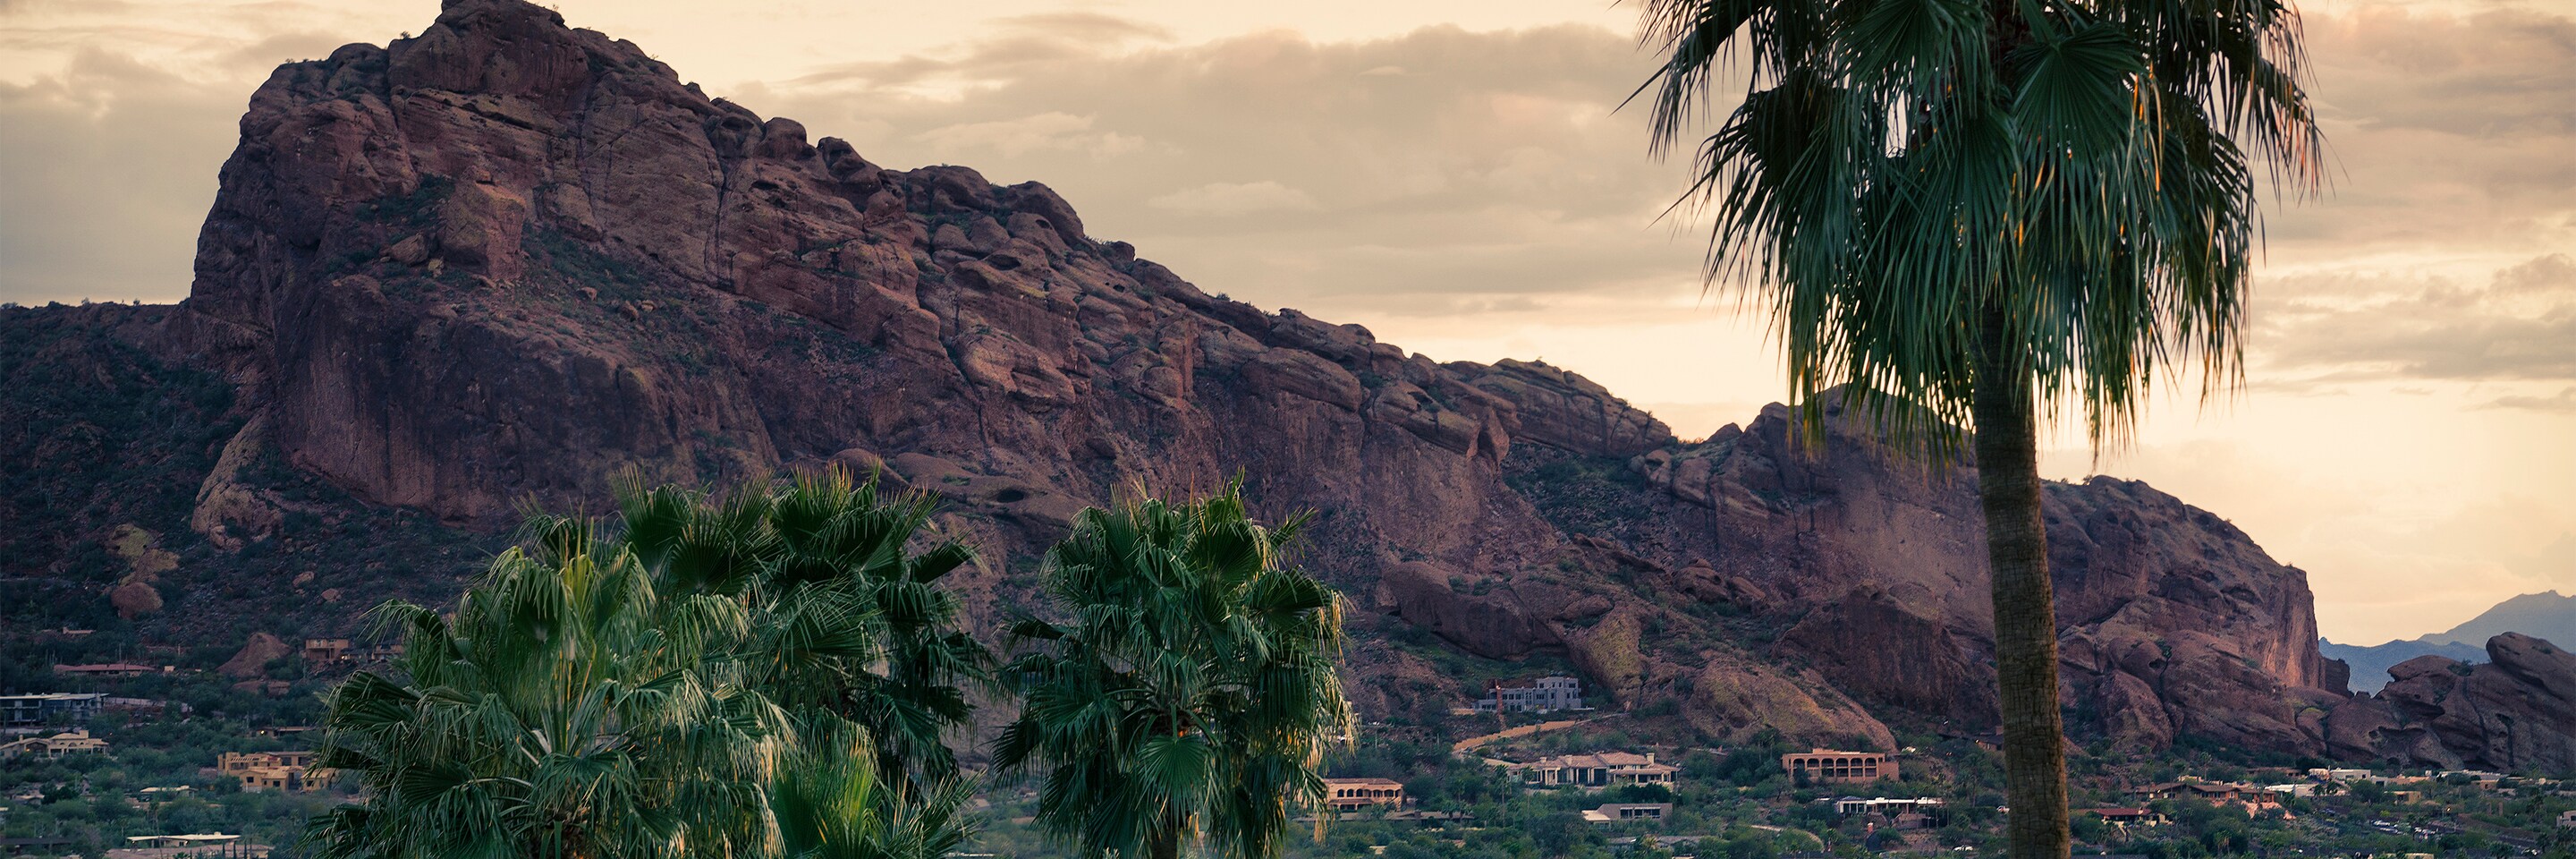 Camelback hiking near mountain hotels and resorts.